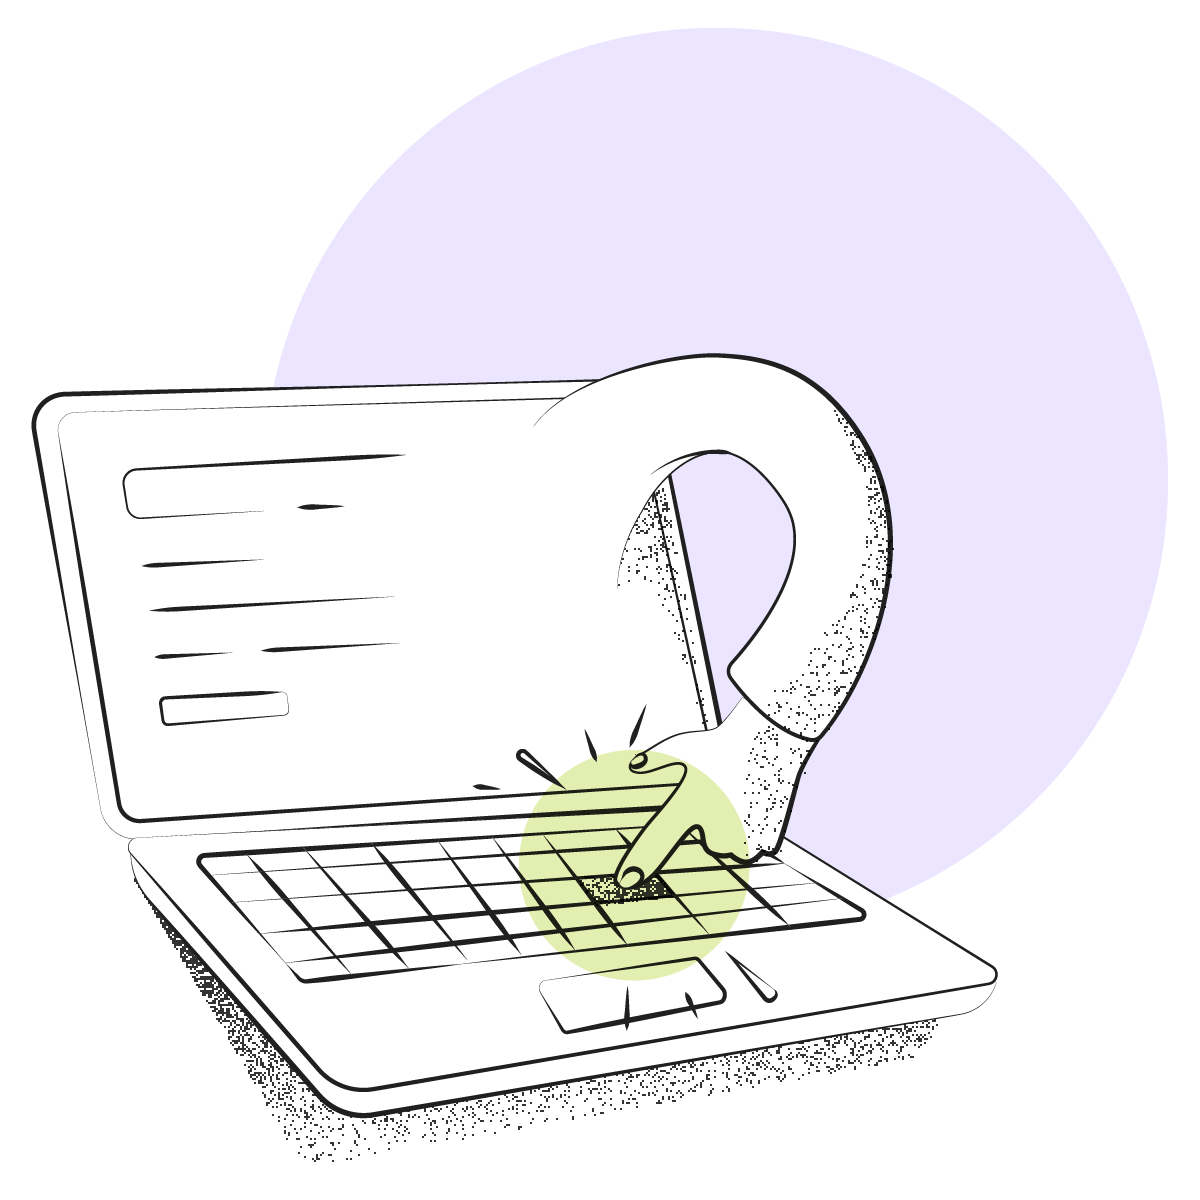 Illustration of a laptop with an arm coming out of it and pressing a key